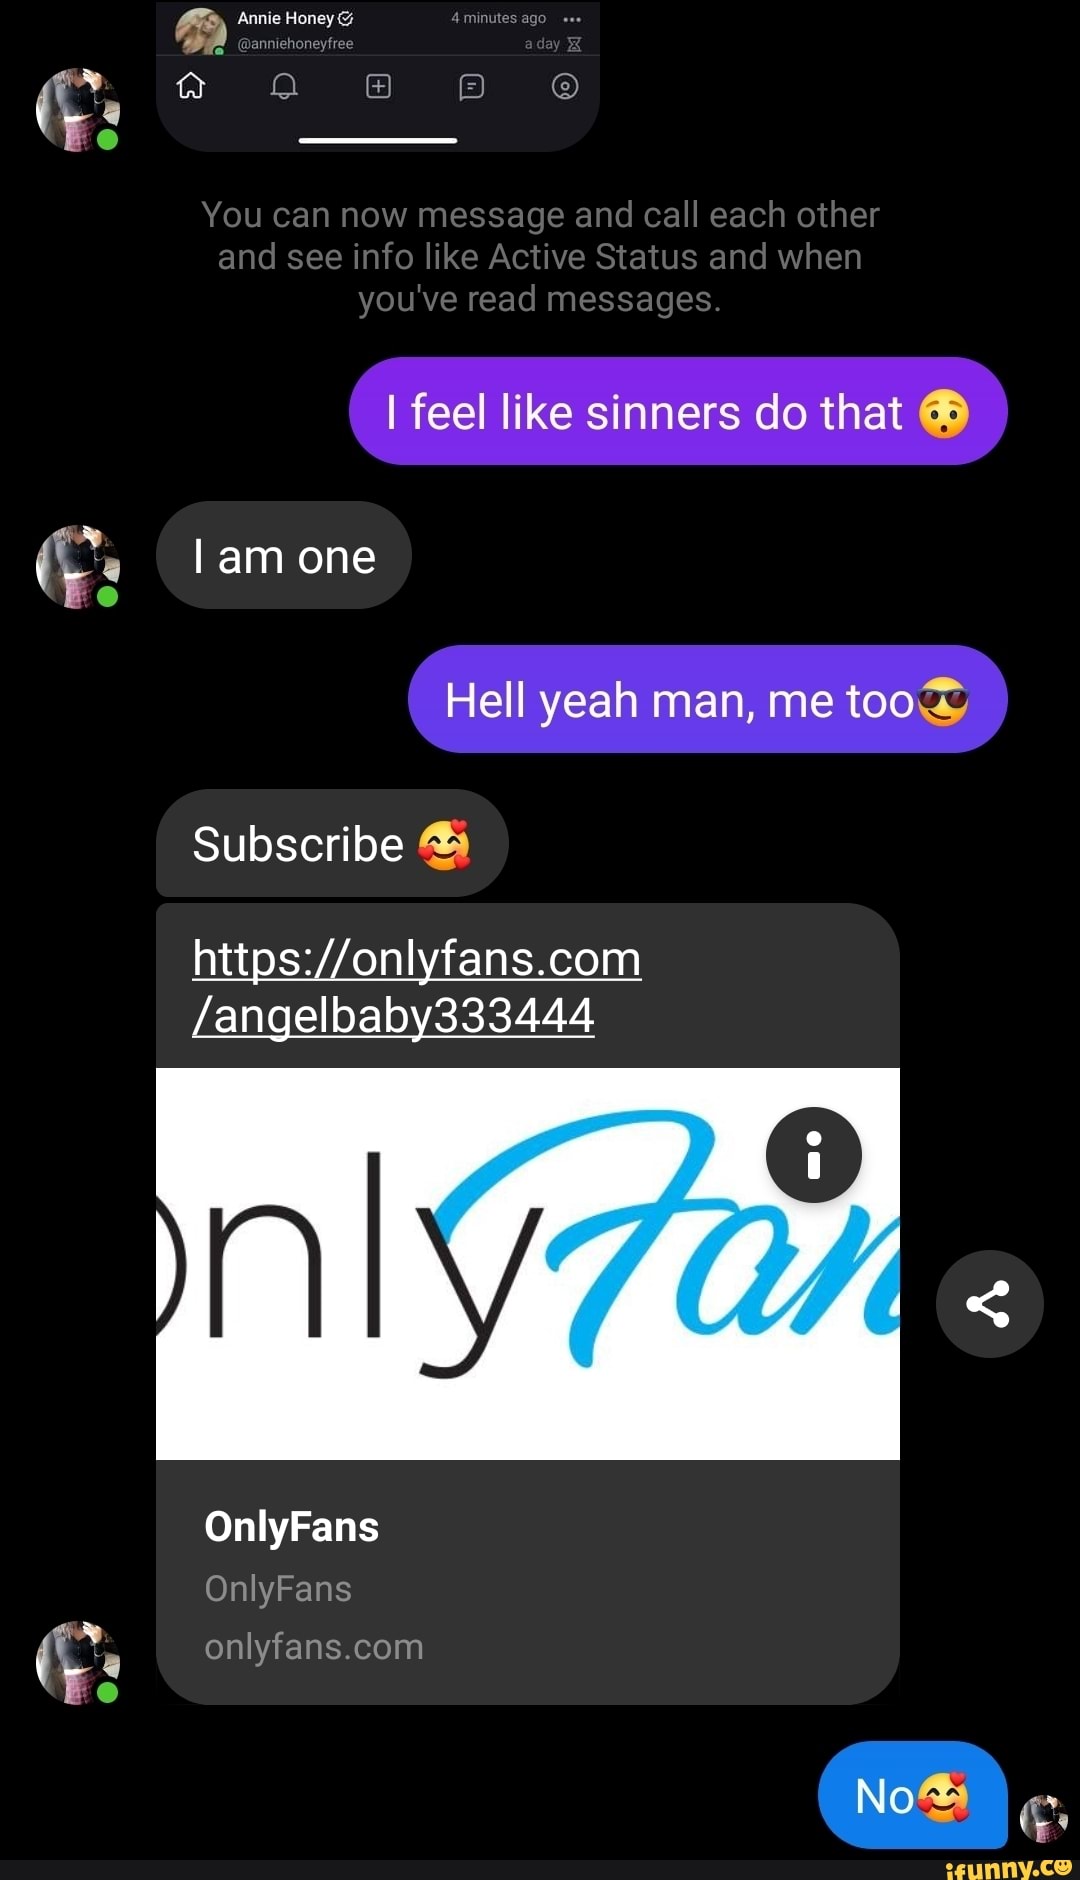 Annie Only Fans